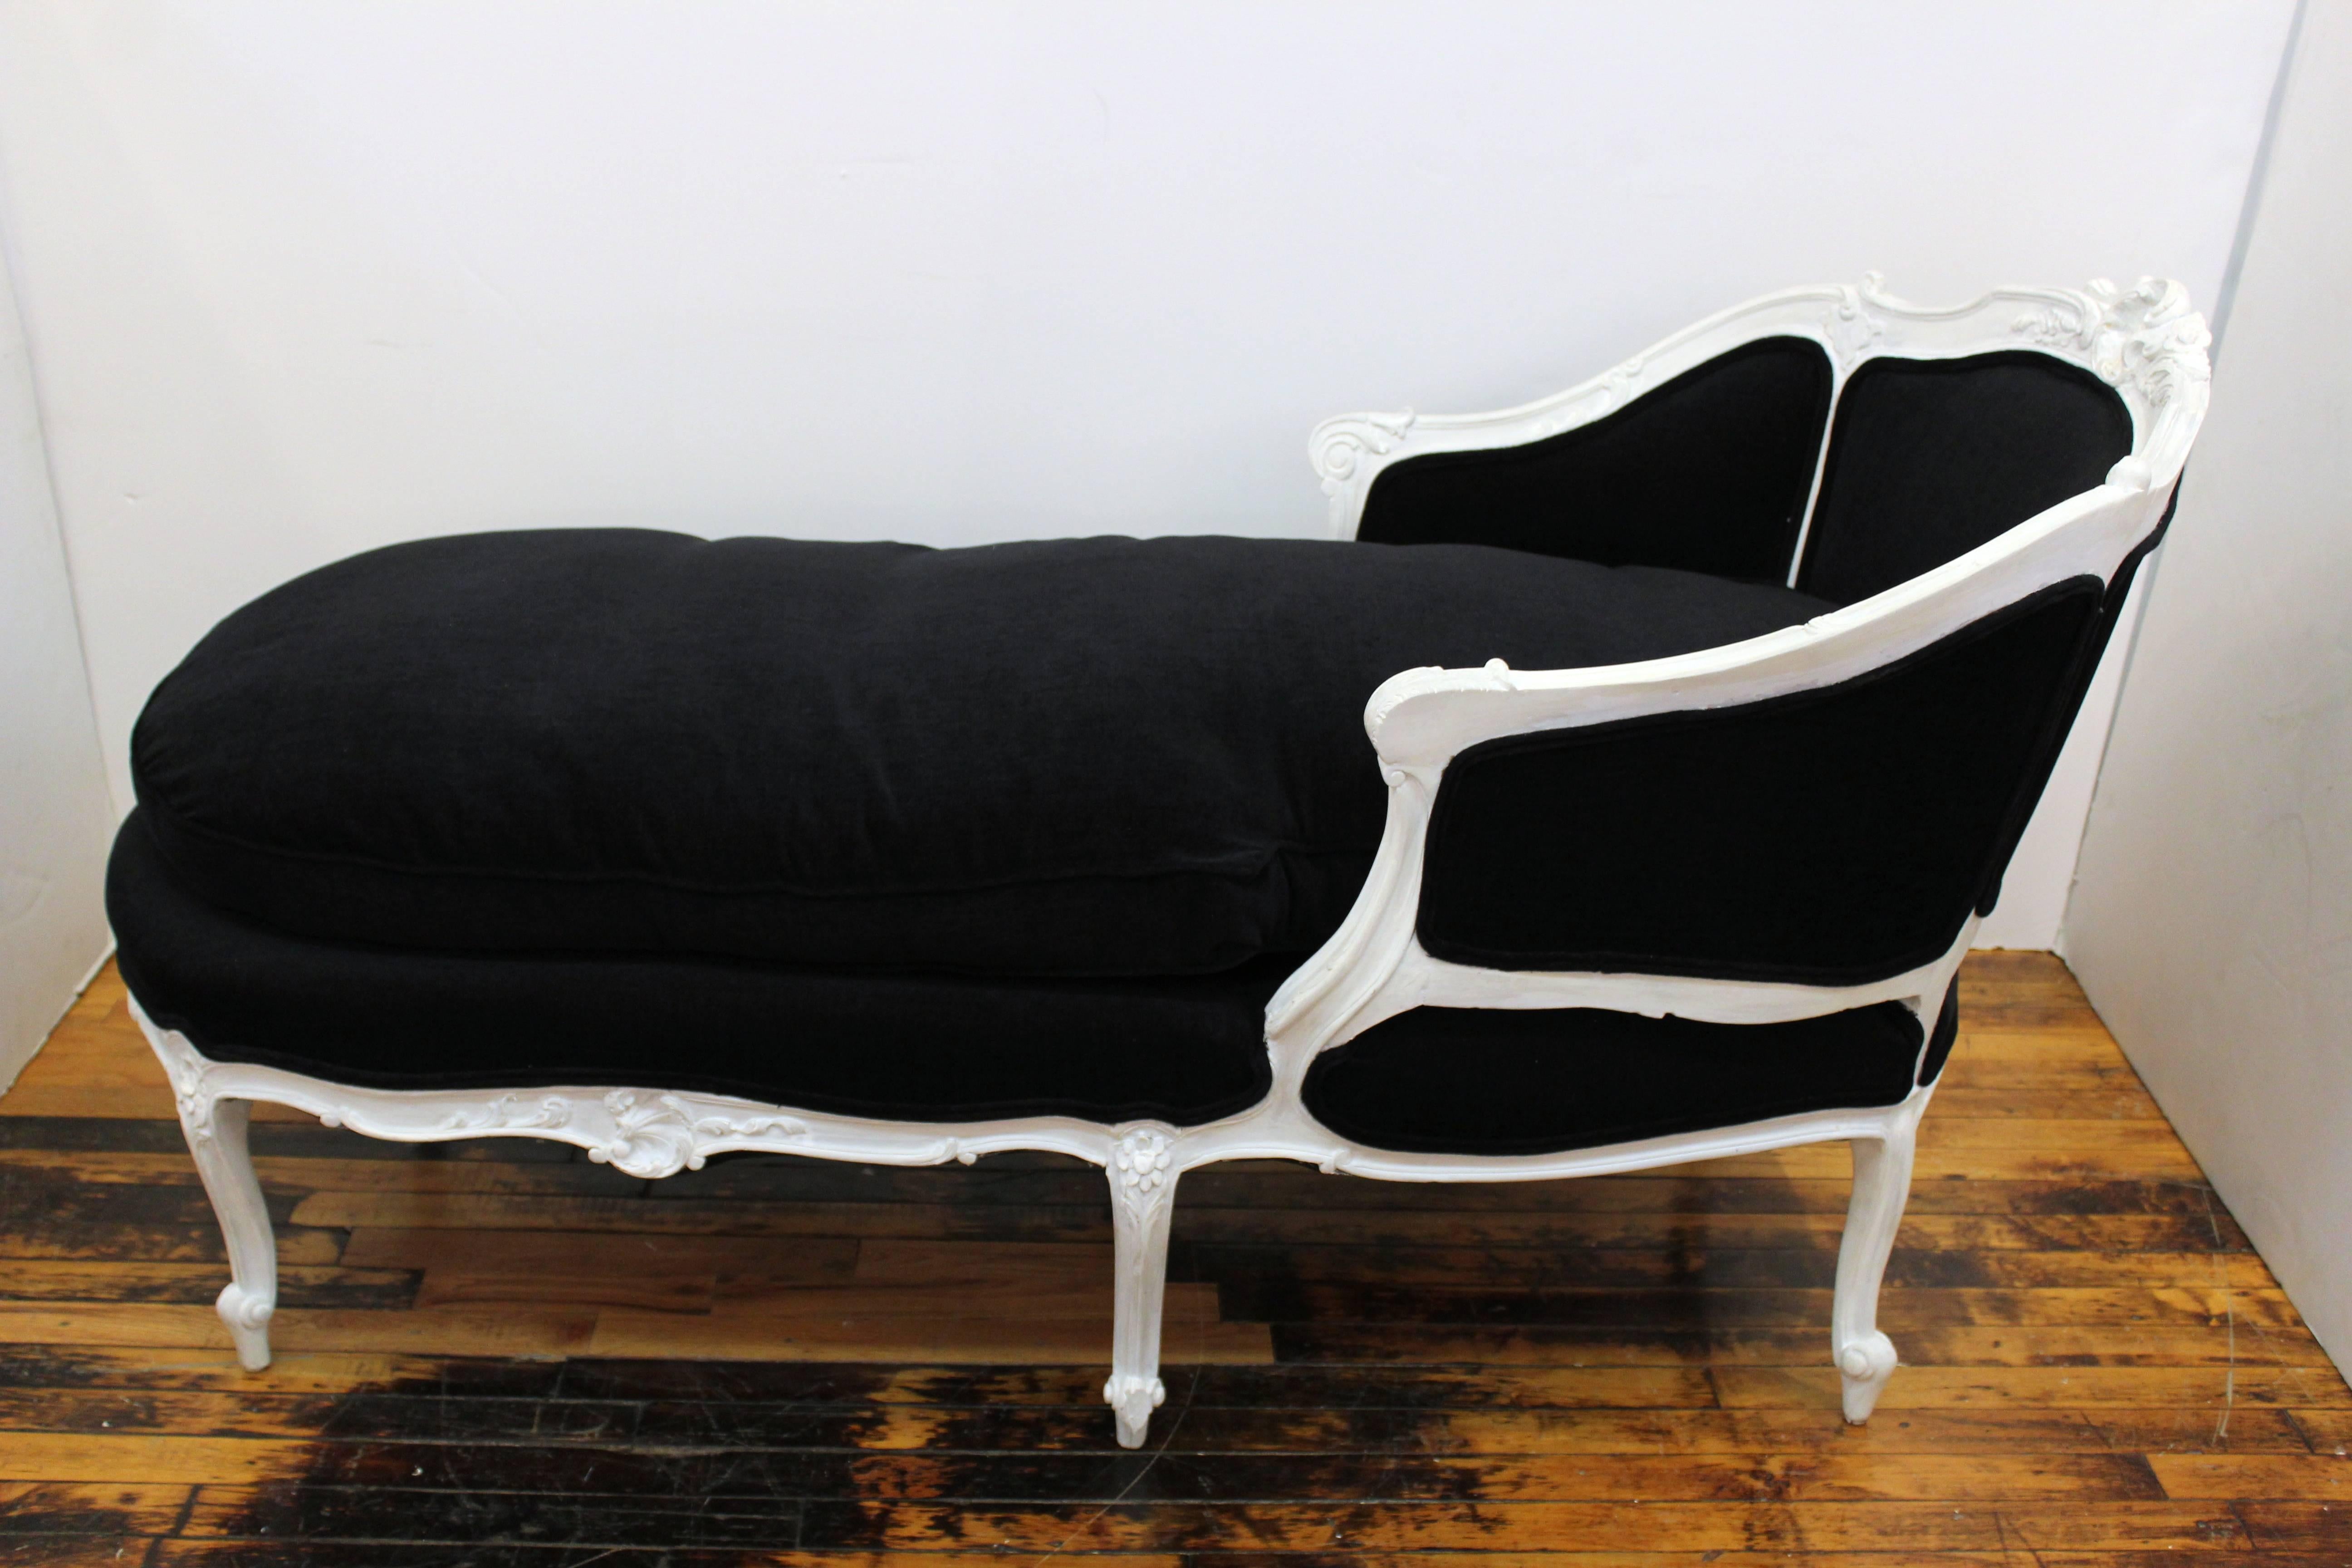 Hollywood Regency style sculpted beechwood chaise lounge made in France in the 1940s. Elaborate wood carving, recently reupholstered in black chenille. Painted white finish. In great vintage condition.